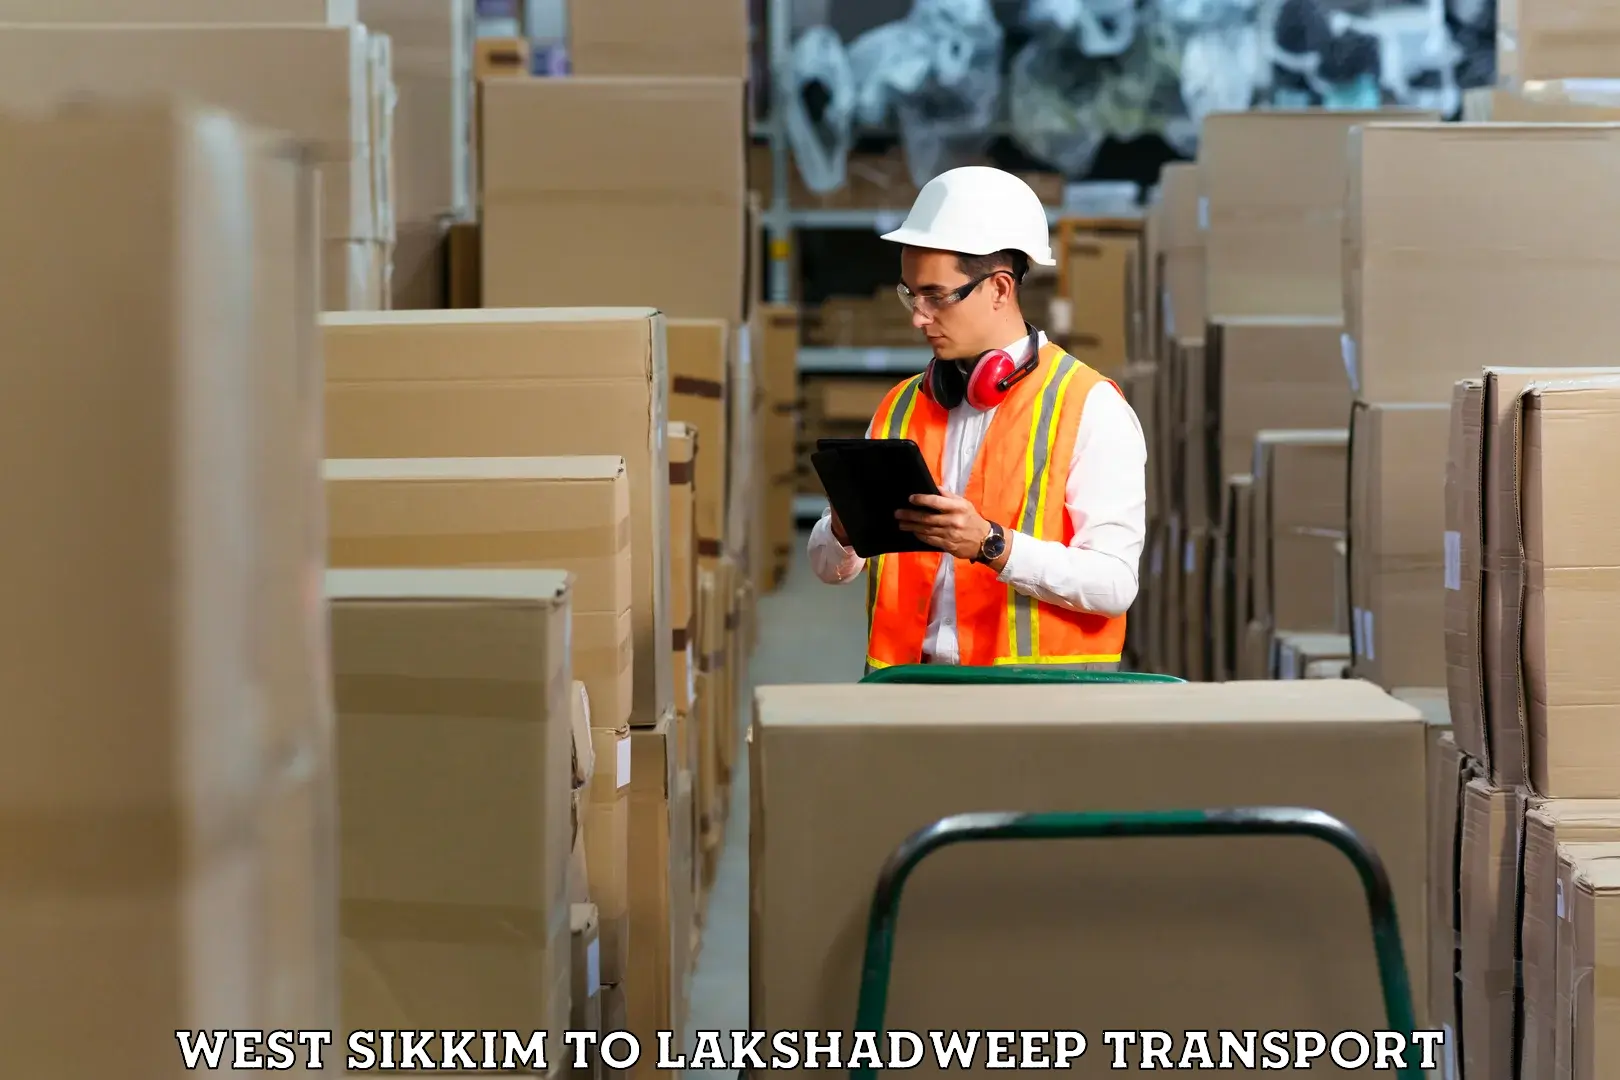 Delivery service West Sikkim to Lakshadweep